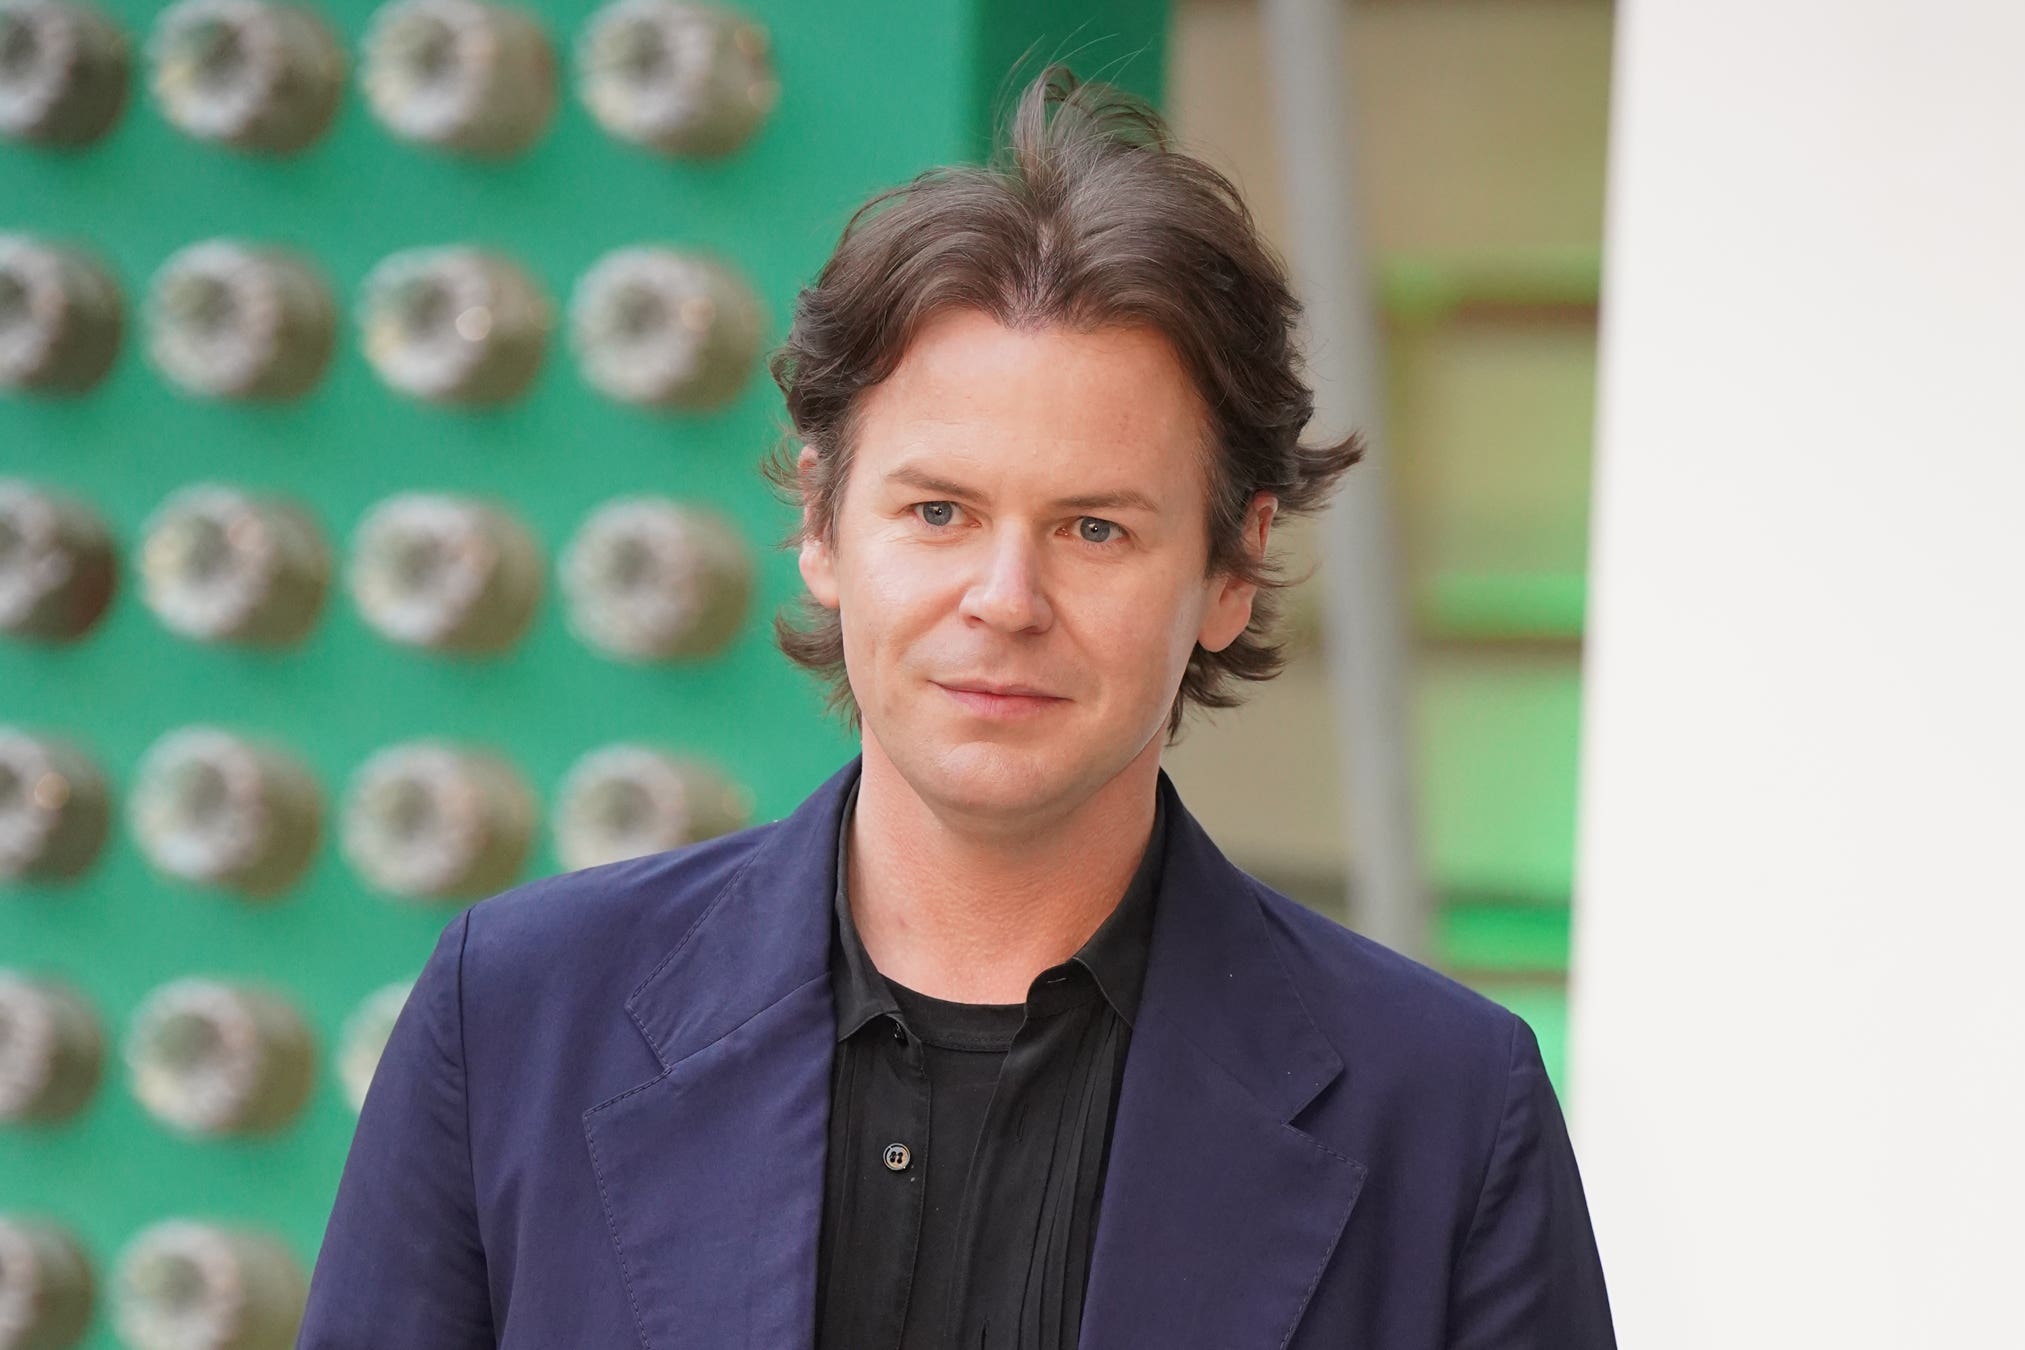 Christopher Kane founded the brand with his sister Tammy Kane in 2006 (Jonathan Brady/PA)